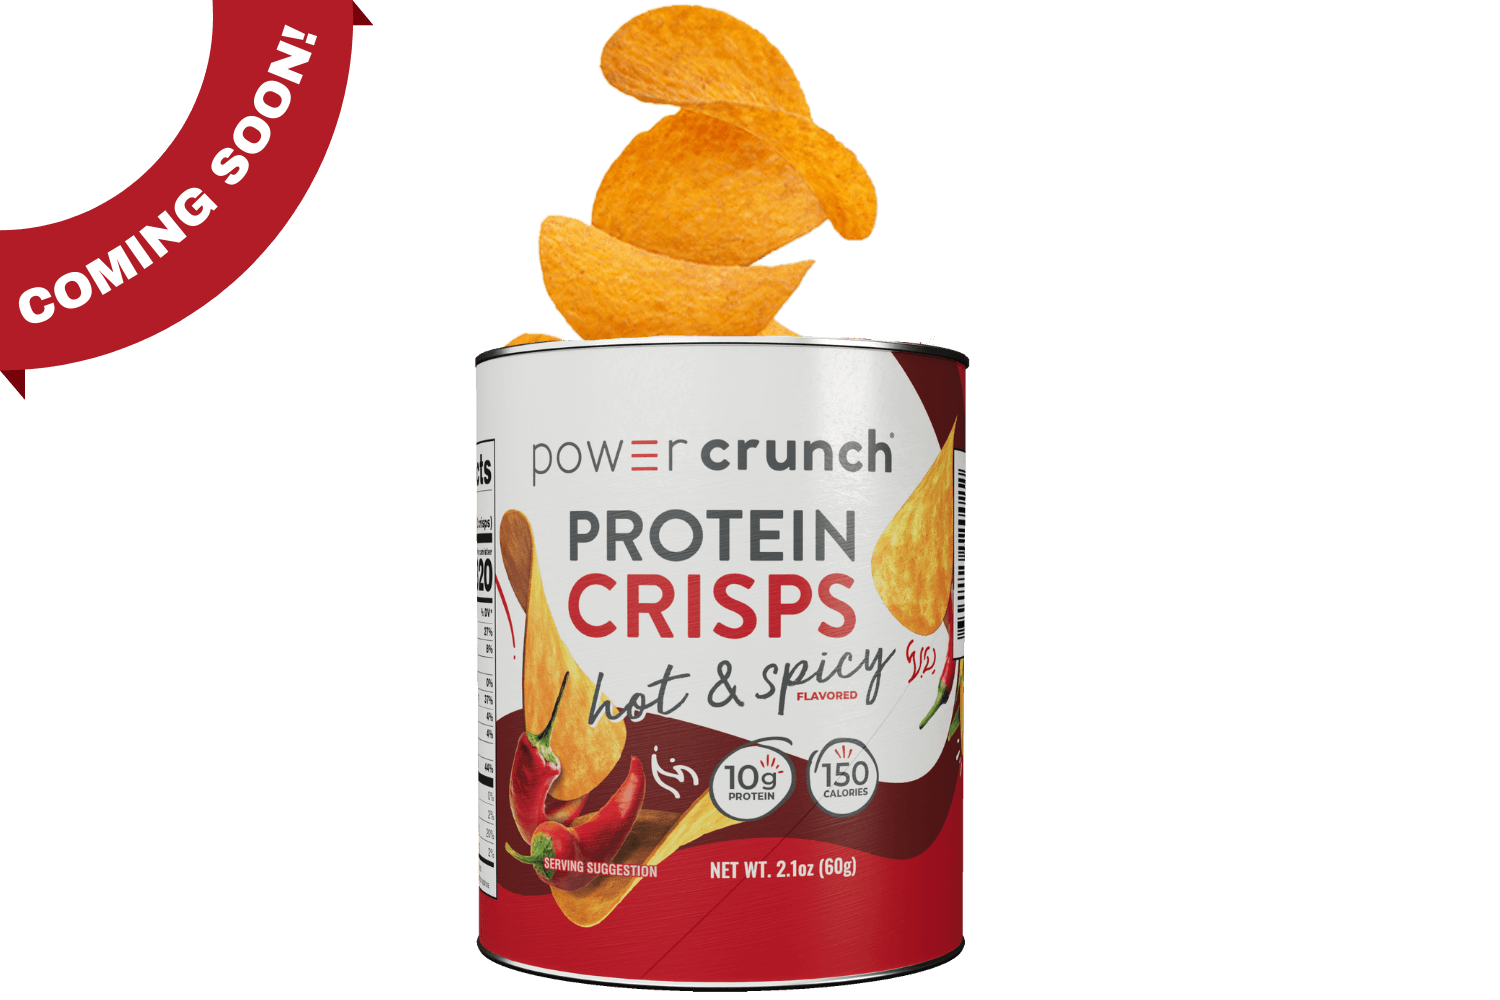 Hot & Spicy Protein Crisps